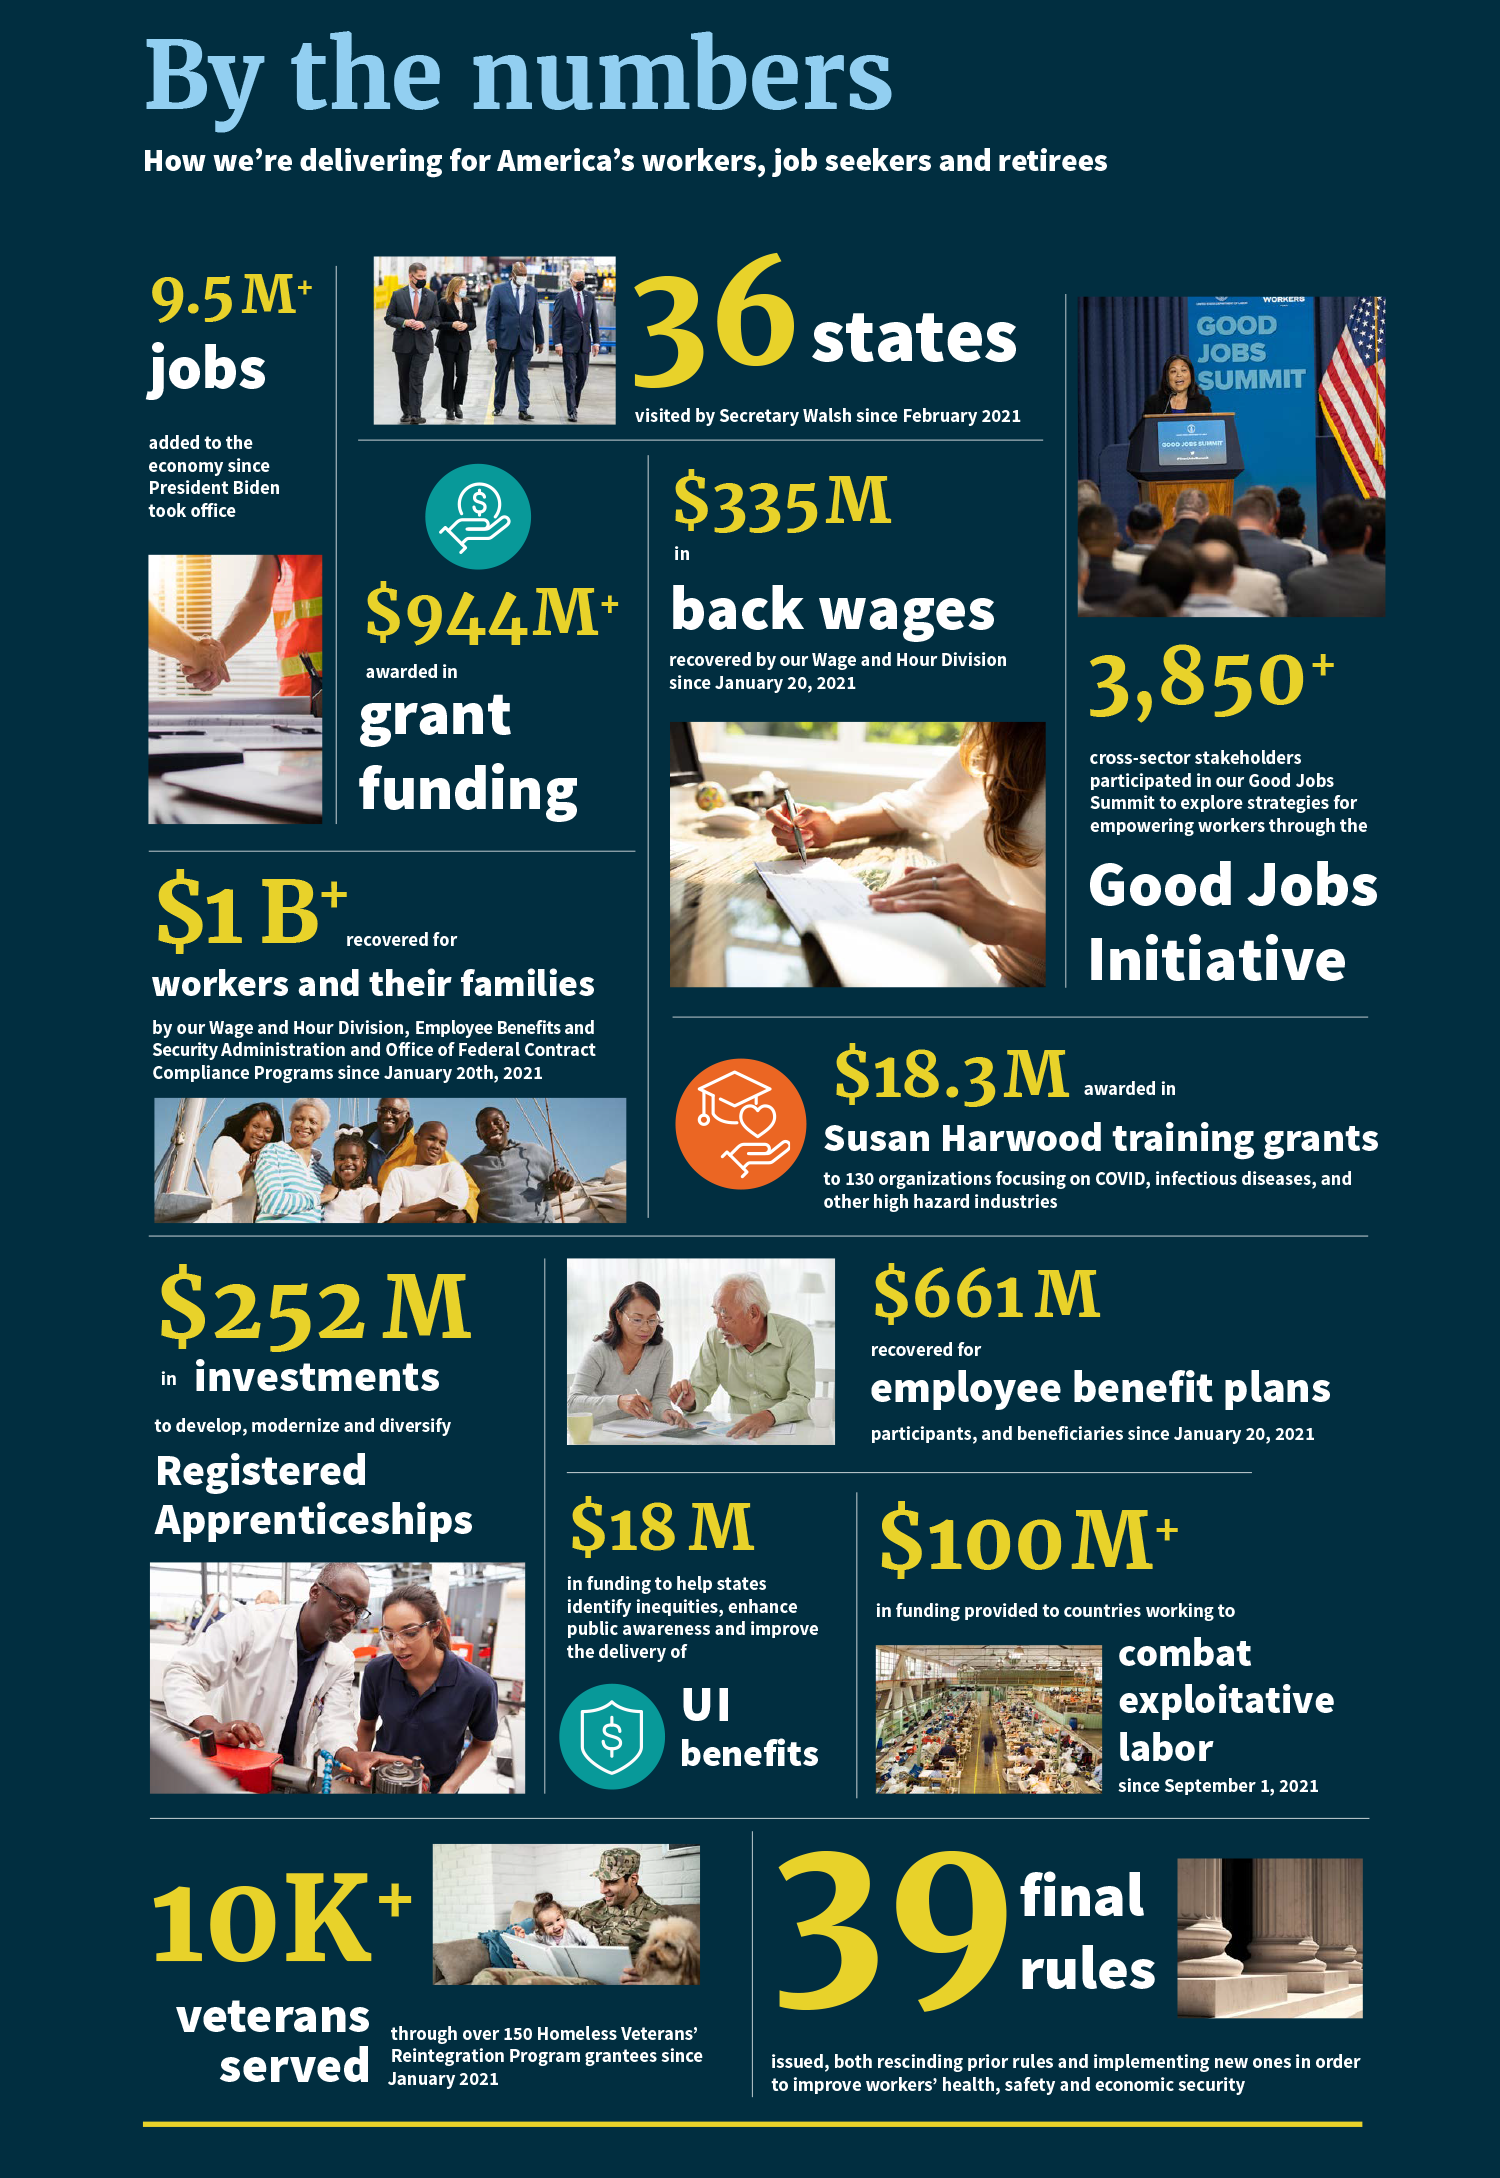 By the numbers infographic: 9.5 M+ jobs added to the economy since President Biden took office. 36 states visited by Secretary Walsh since February 2021. 3,850+ cross-sector stakeholders participated in our Good Jobs Summit to explore strategies for  empowering workers through the Good Jobs Initiative. $944 M+ awarded in grant funding. $335 M in back wages recovered by our Wage and Hour Division since January 20, 2021. $1 B+ recovered for workers and their families by our Wage and Hour Division, Employee Benefits and  Security Administration and Office of Federal Contract Compliance Programs since January 20th, 2021. $18.3M awarded in Susan Harwood training grants to 130 organizations focusing on COVID, infectious diseases, and other high hazard industries. $252 M in investments to develop, modernize and diversify Registered Apprenticeships. $661 M recovered for employee benefit plans participants, and beneficiaries since January 20, 2021. $18 M in funding to help states identify inequities, enhance public awareness and improve the delivery of UI benefits. $100 M+ in funding provided to countries working to combat exploitative labor since September 1, 2021. 10k+ veterans served through over 150 Homeless Veterans’ Reintegration Program grantees since January 2021. 39 final rules issued, both rescinding prior rules and implementing new ones in order to improve workers’ health, safety and economic security